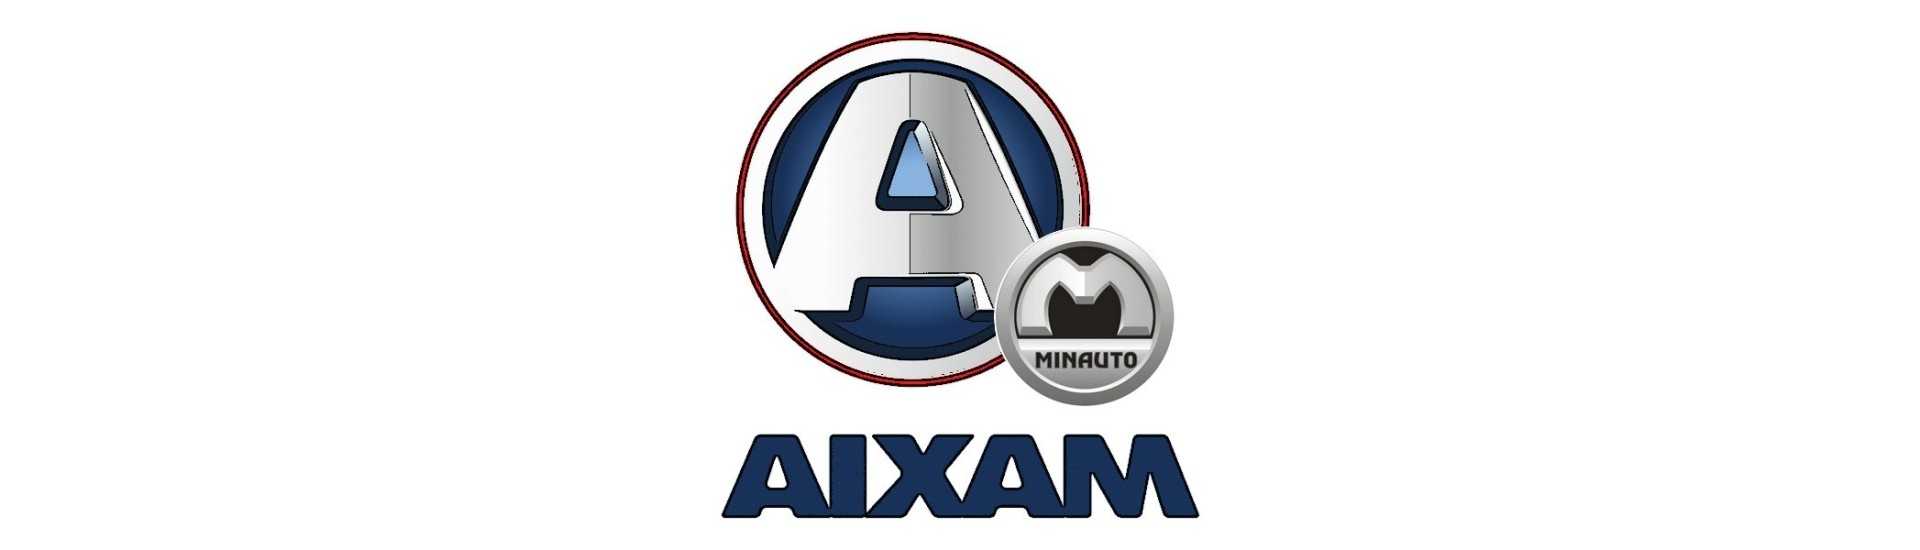 Door hub at the best price for car without a permit Aixam Minauto